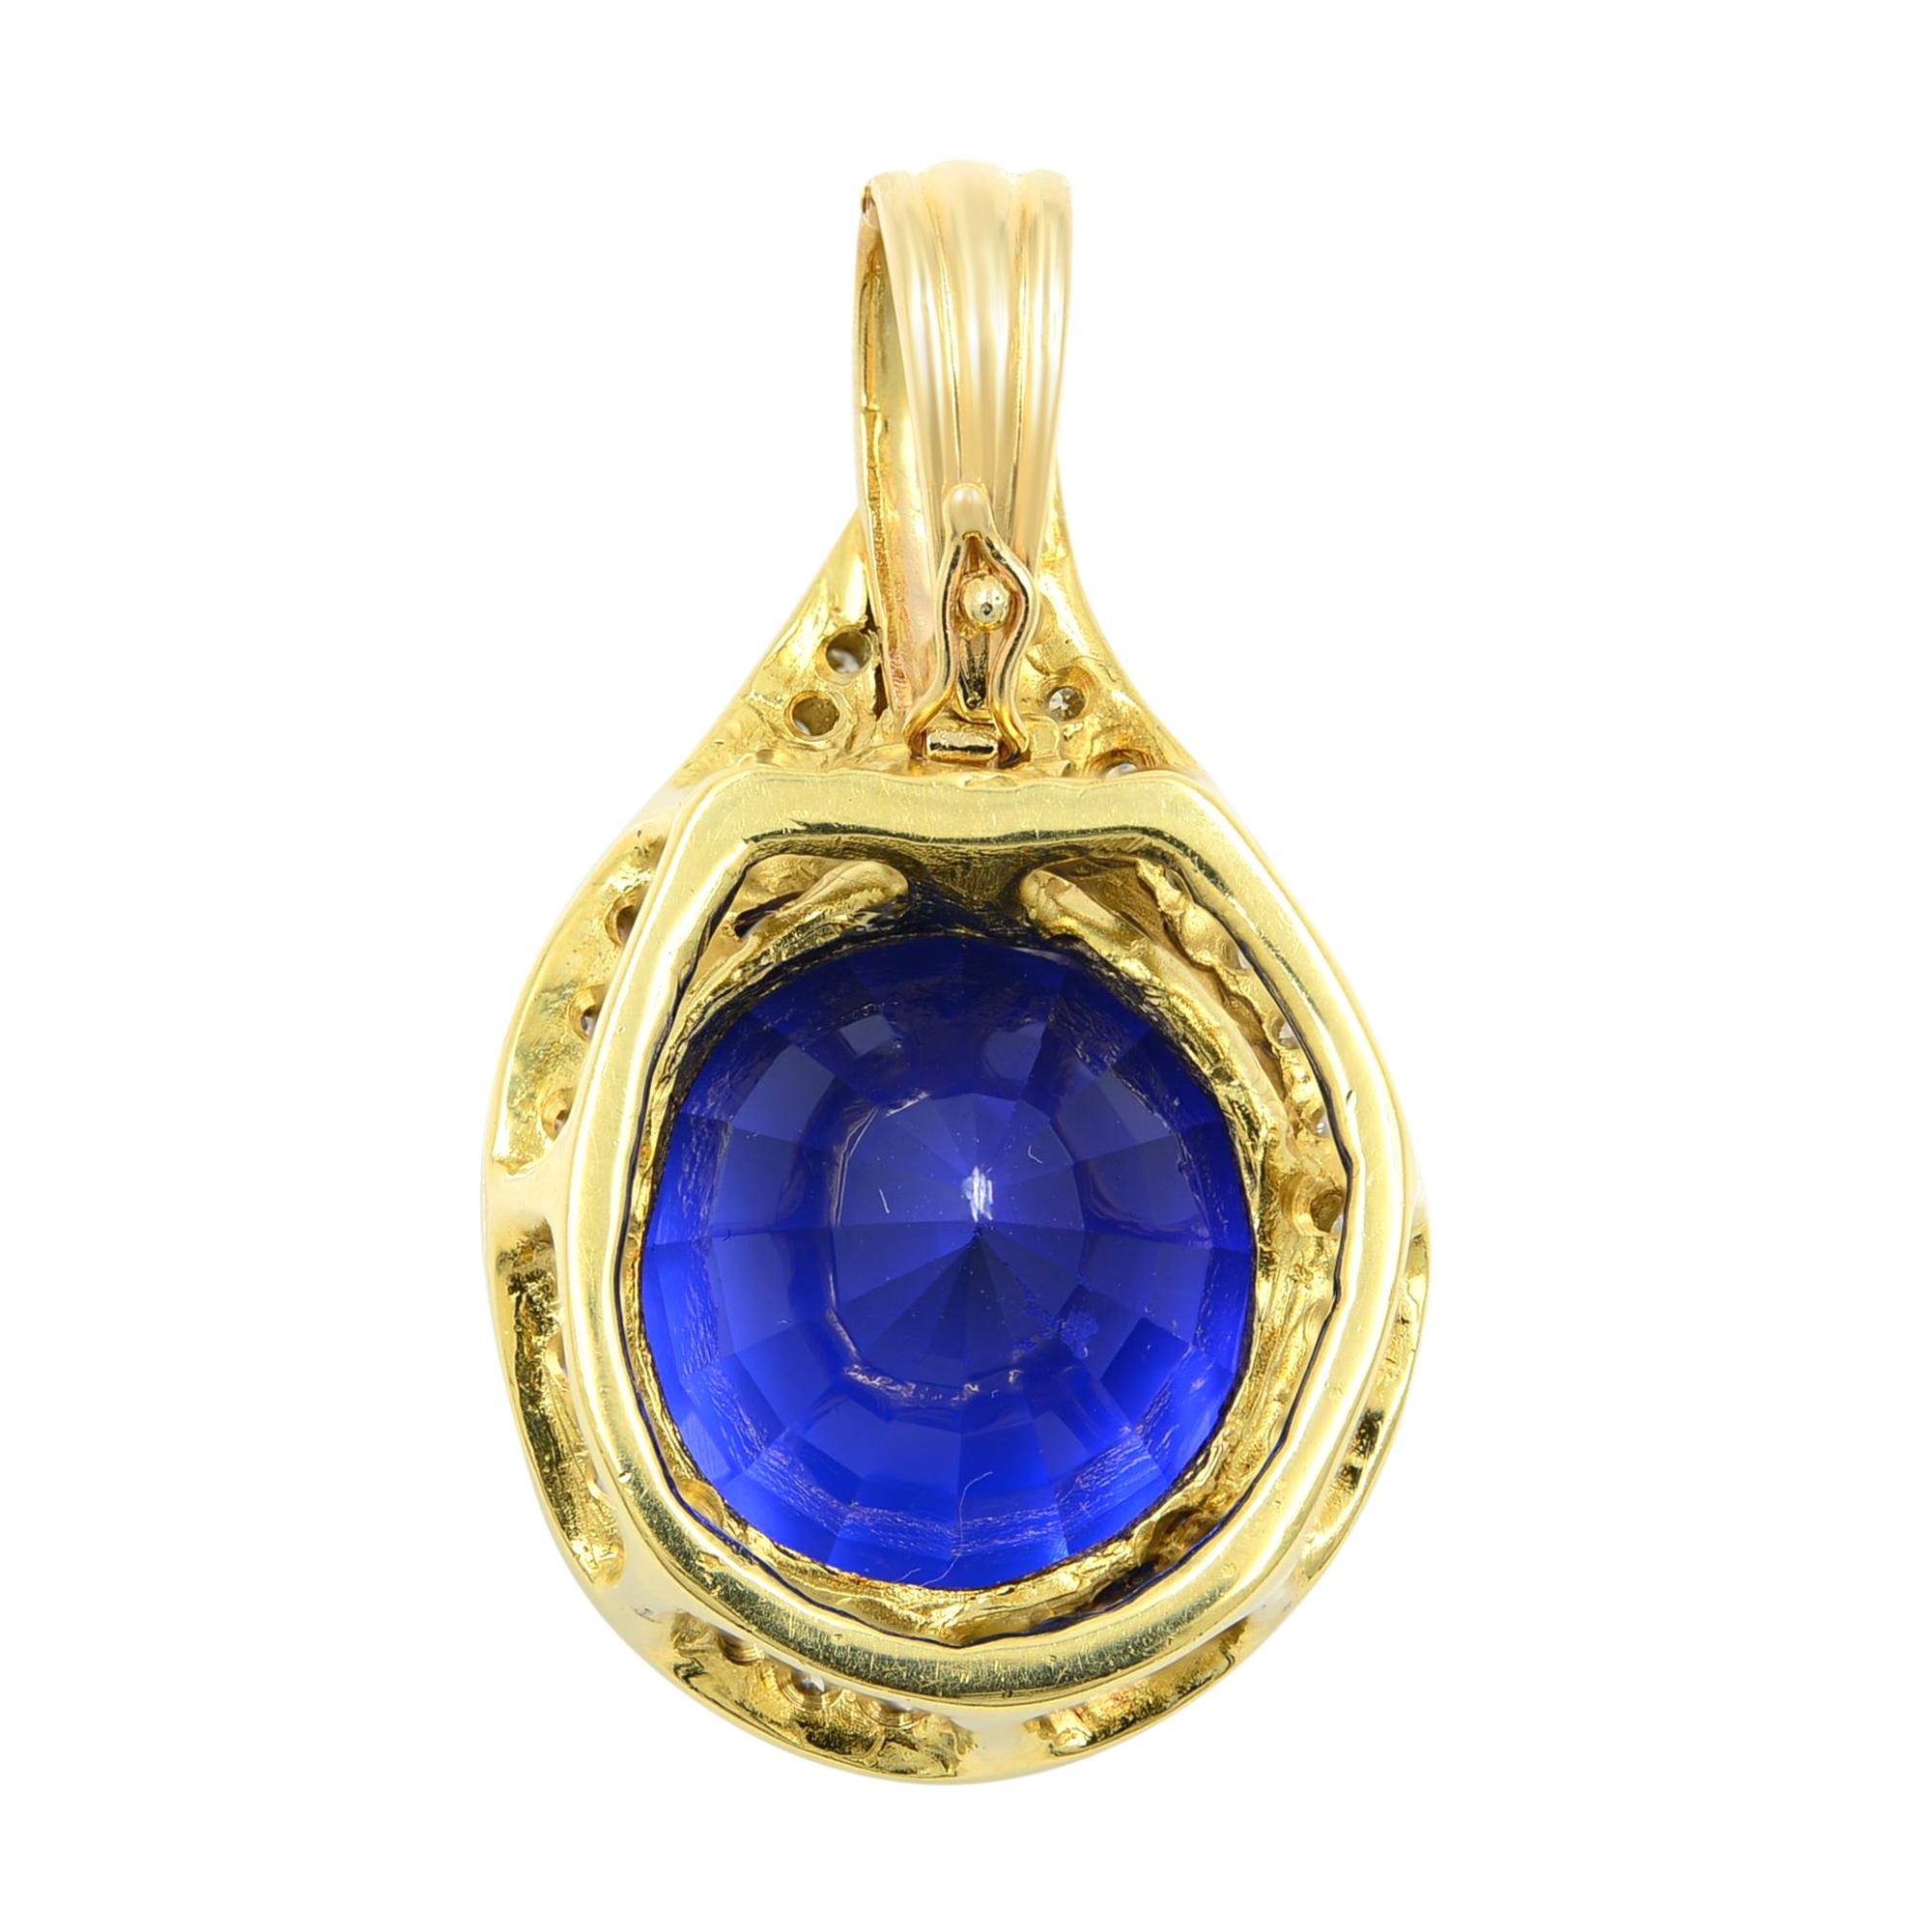 This knockout jewel astounds your senses with an extra-radiant, deep, rich blue color, round cut Tanzanite - weighing 27.66 carats. The uniquely stunning and vibrant gemstone is surrounded by brilliant-cut diamonds set in 14 karat yellow gold. This